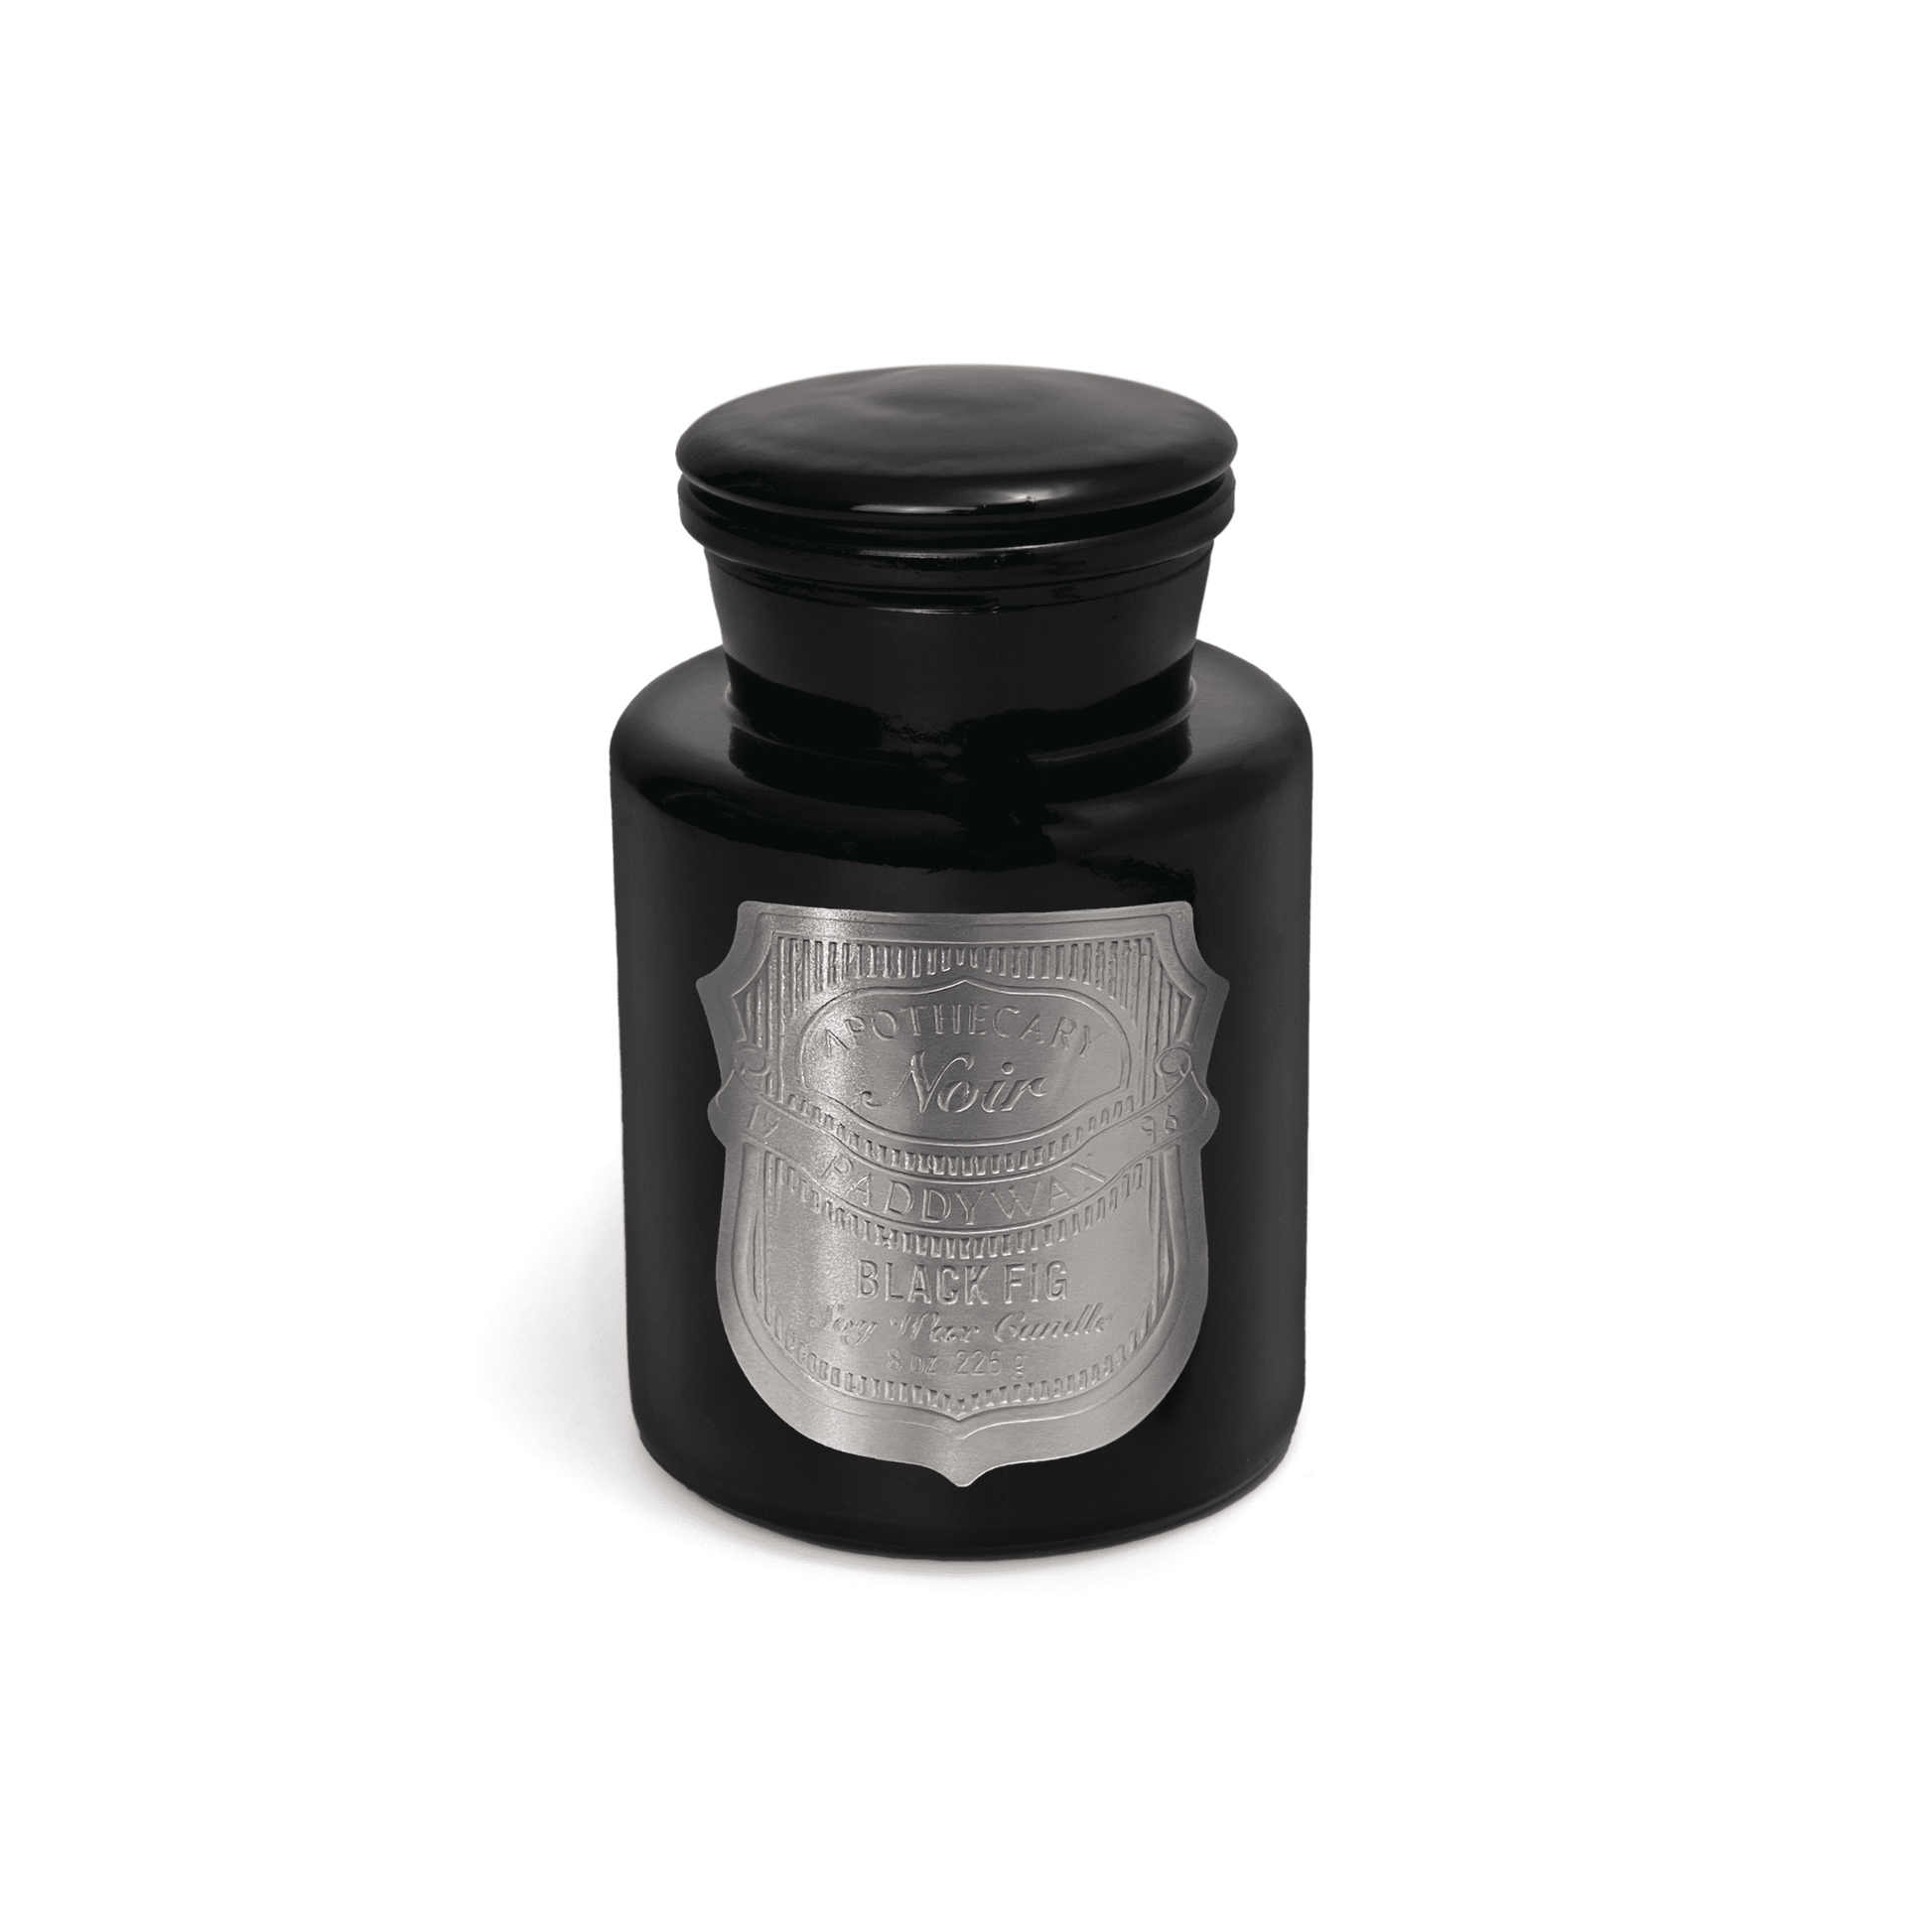 Apothecary Noir - Black Fig 8oz candle on a white background.